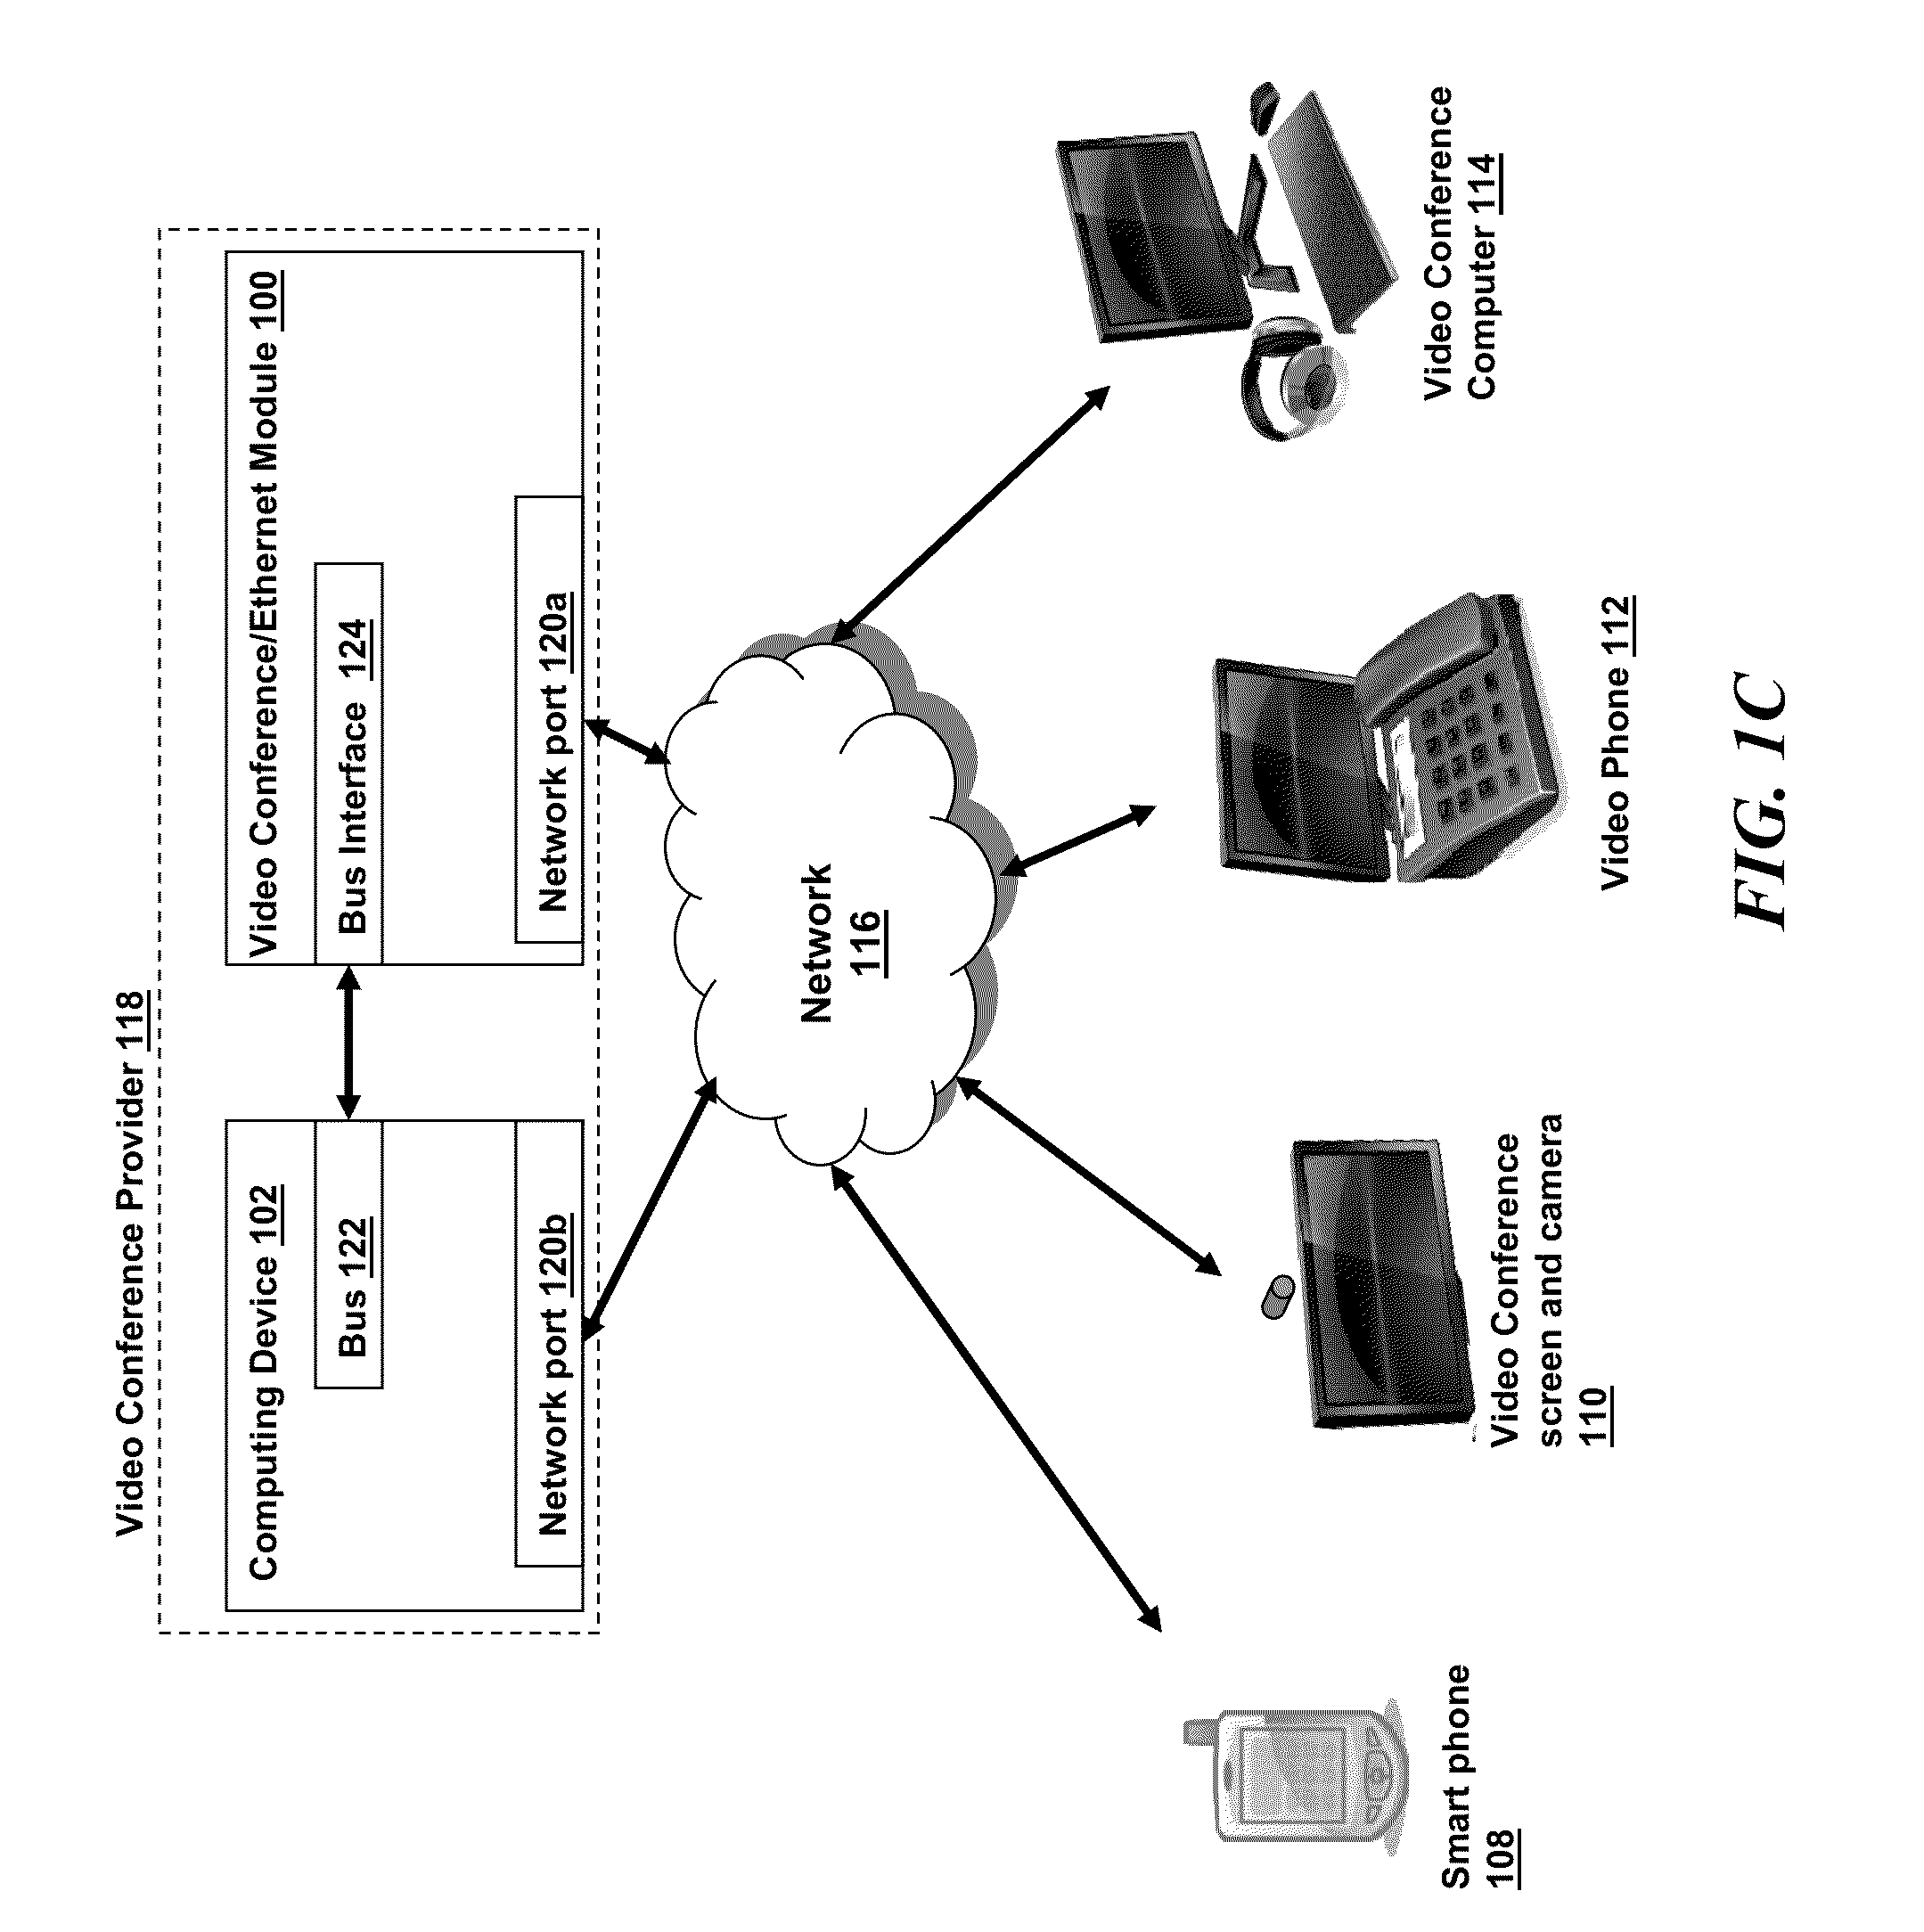 Systems and methods for providing video conferencing services via an ethernet adapter